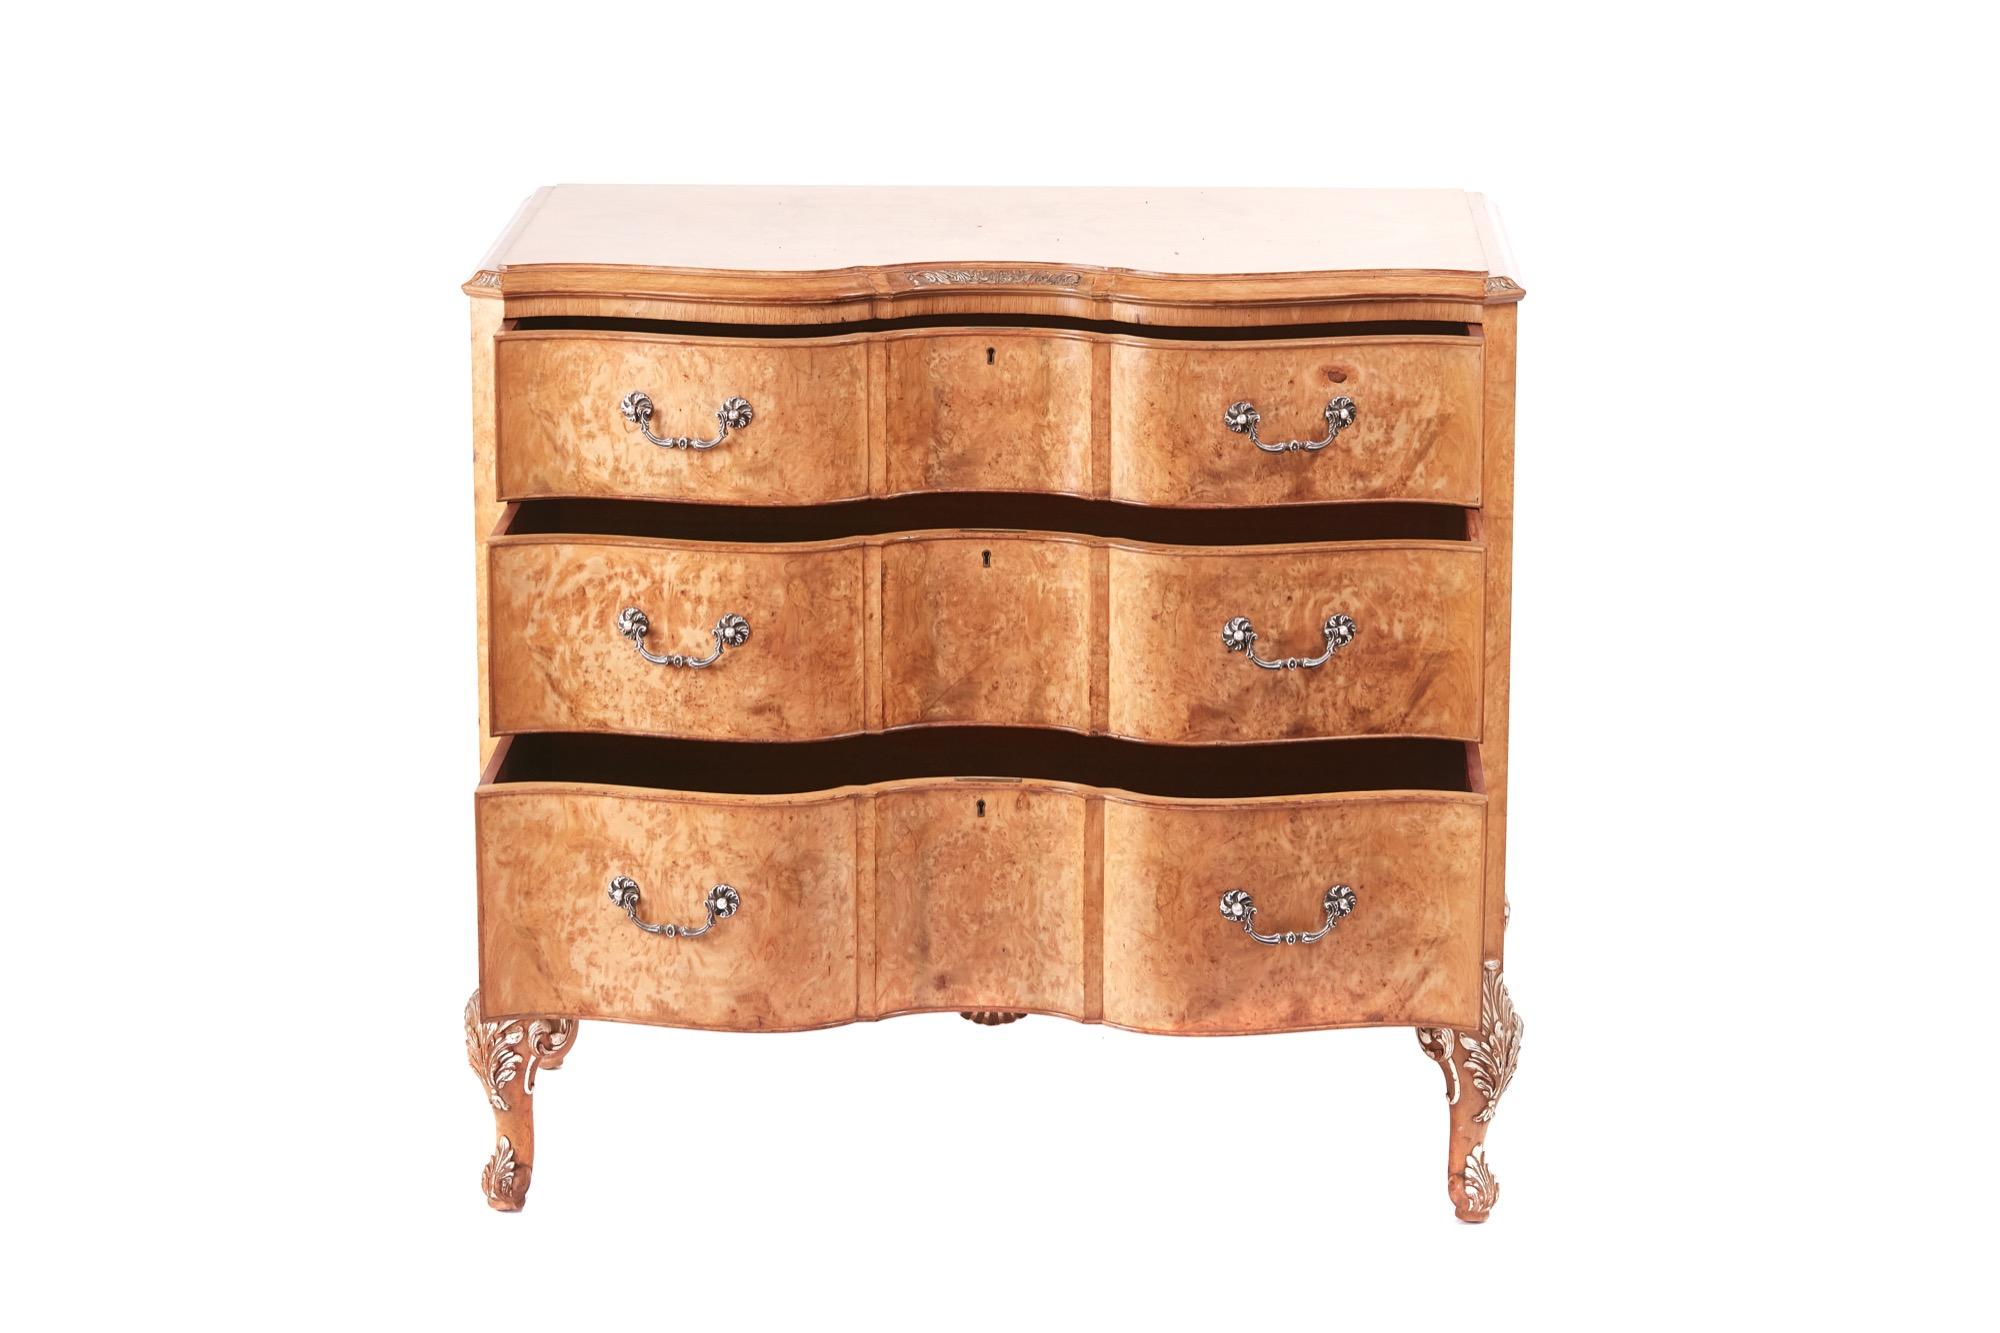 Fine quality bird's-eye maple serpentine shaped chest of drawers, having a lovely quality bird's-eye maple top with a moulded and carved edge, three long serpentine shaped drawers with original silver plated handles, shaped apron with carved walnut